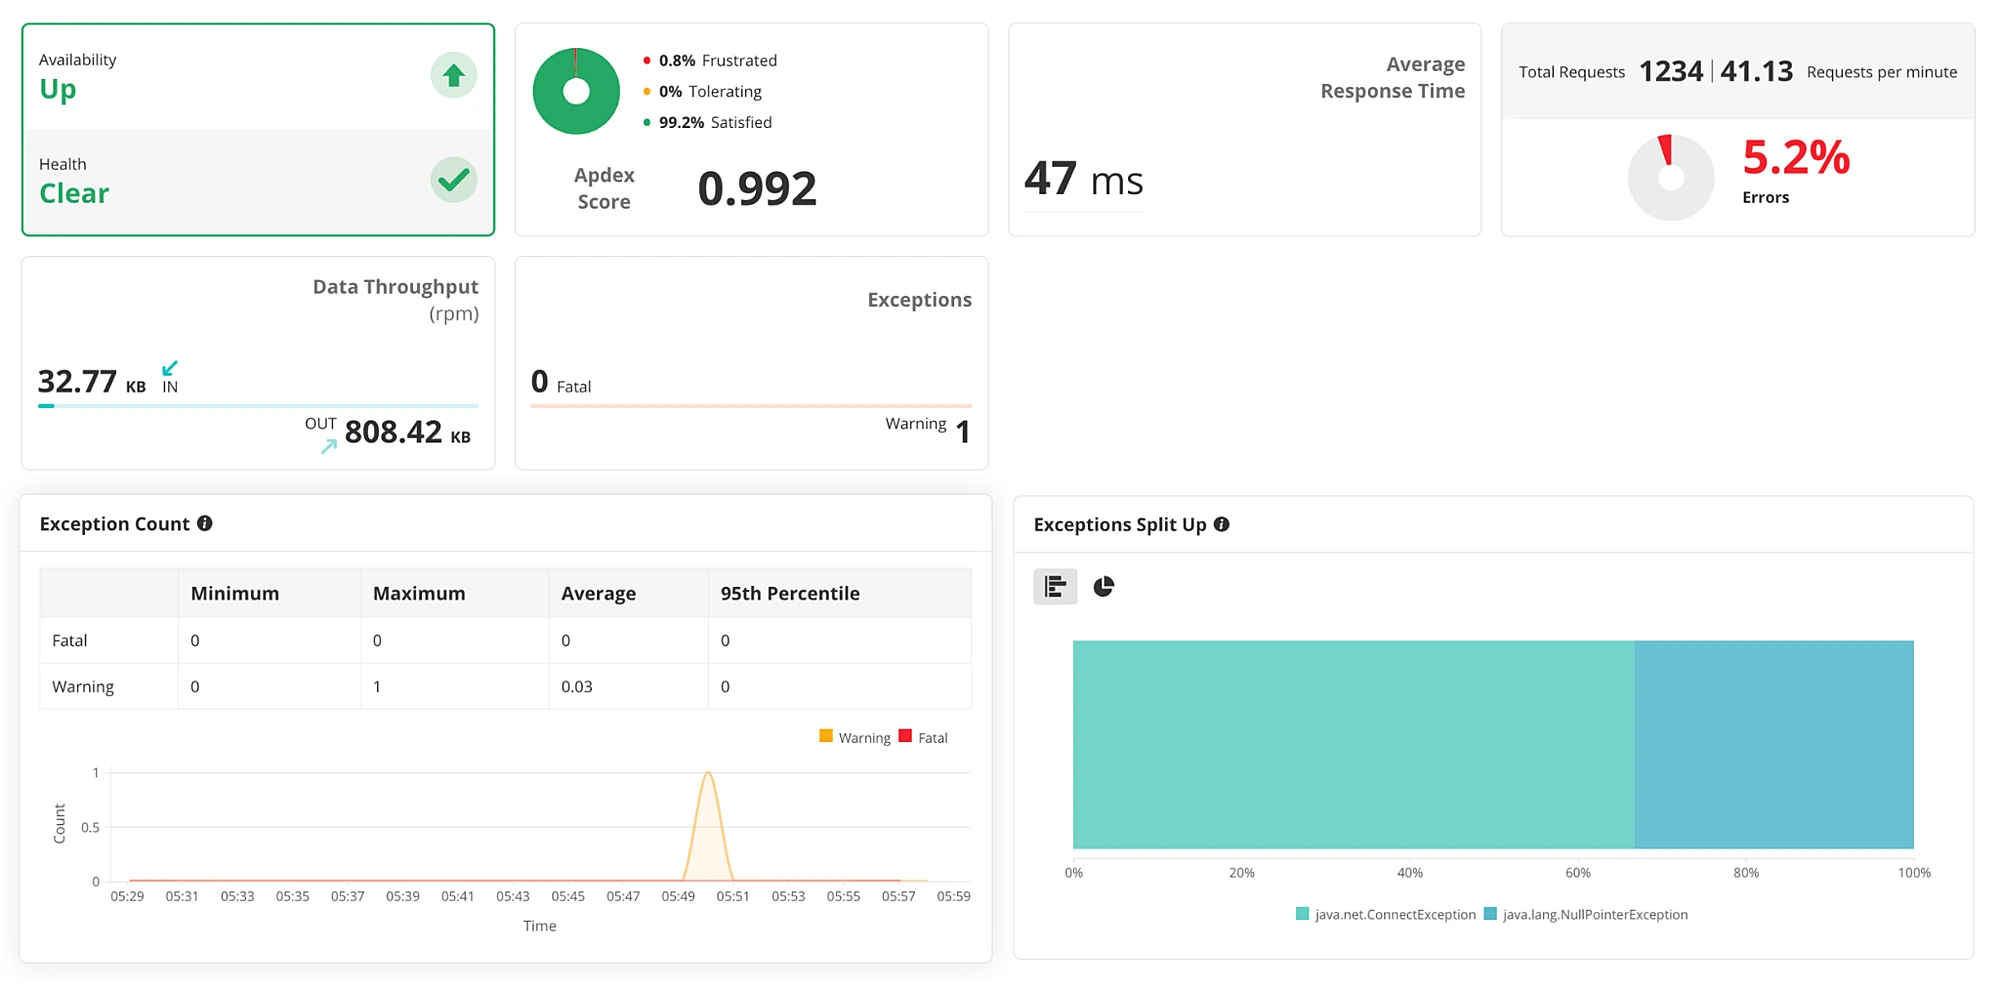 Application performance monitoring dashboard showing availability, health, and apdex scores